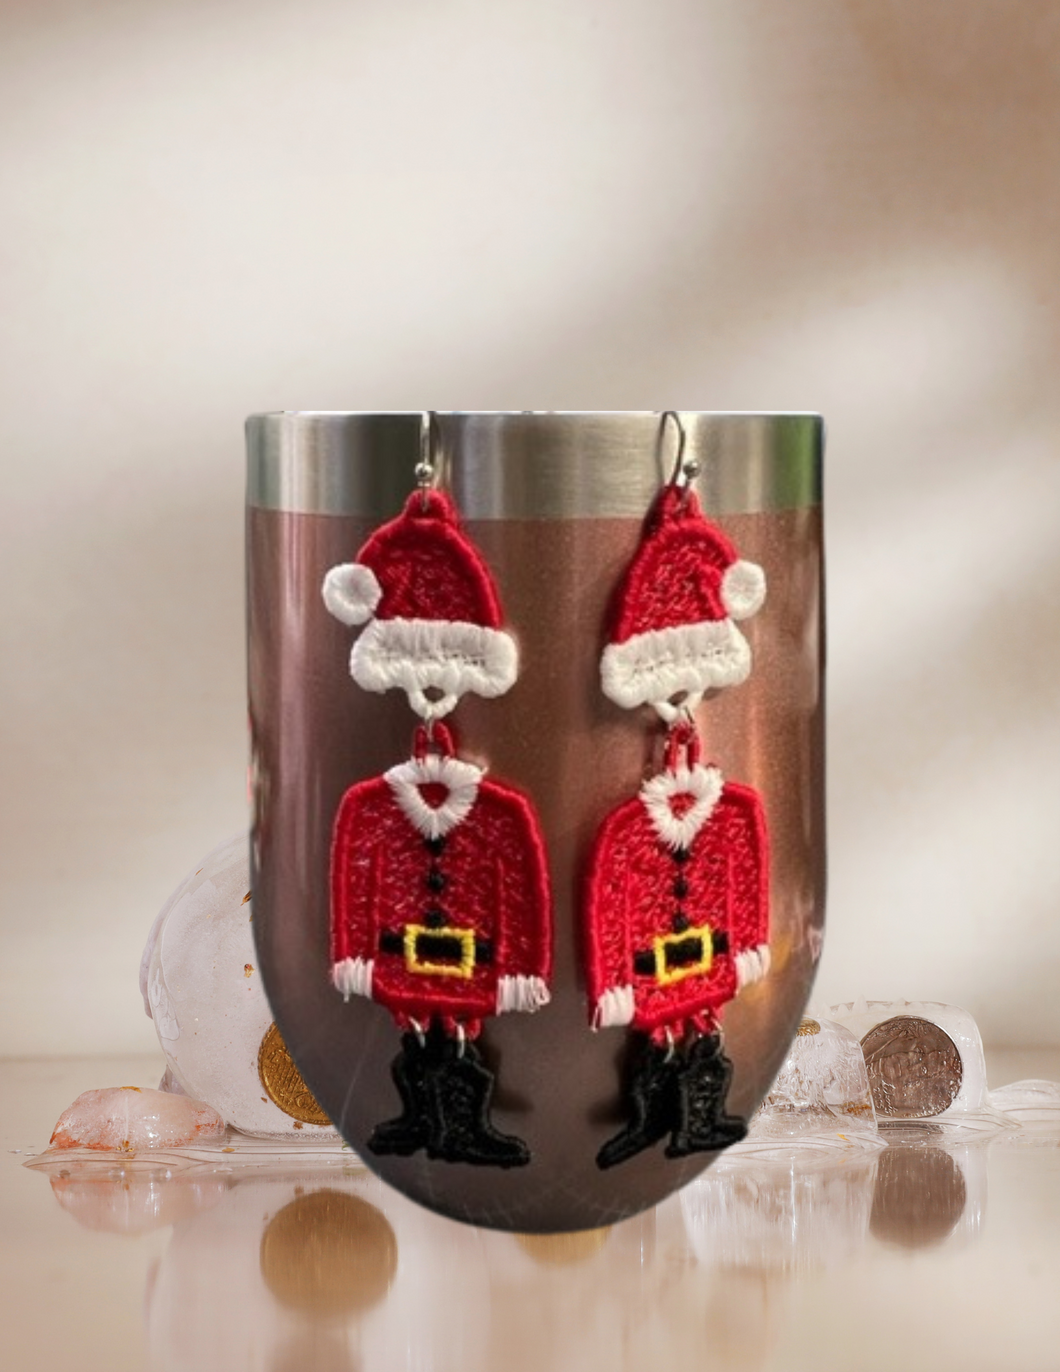 Earrings - Embroidered Santa Suit